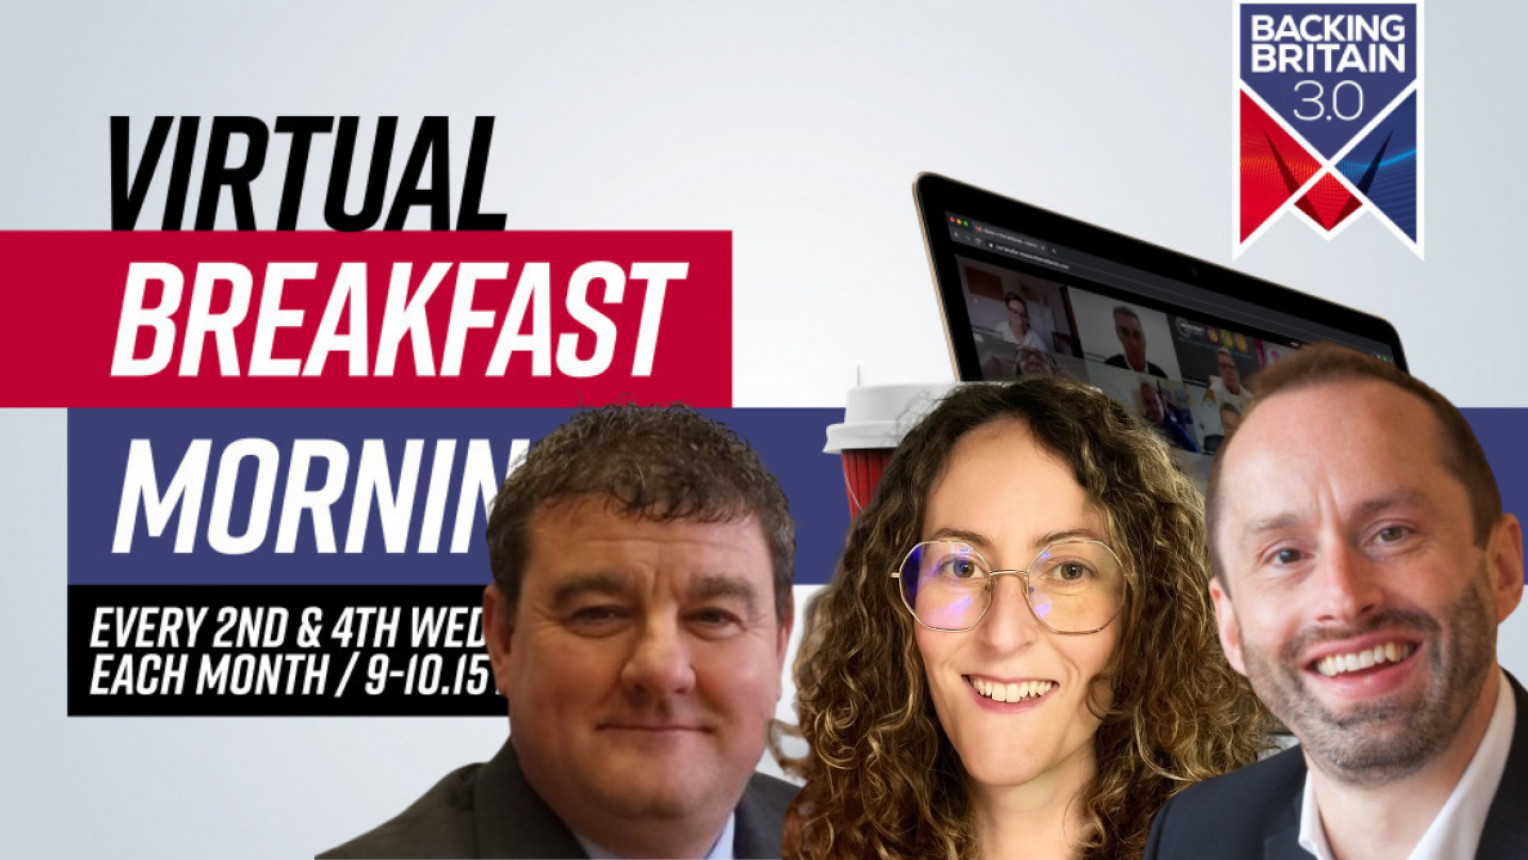 Backing Britain Virtual Breakfast Morning with Neos Technologies, Atlas Copco and Schneider Electric